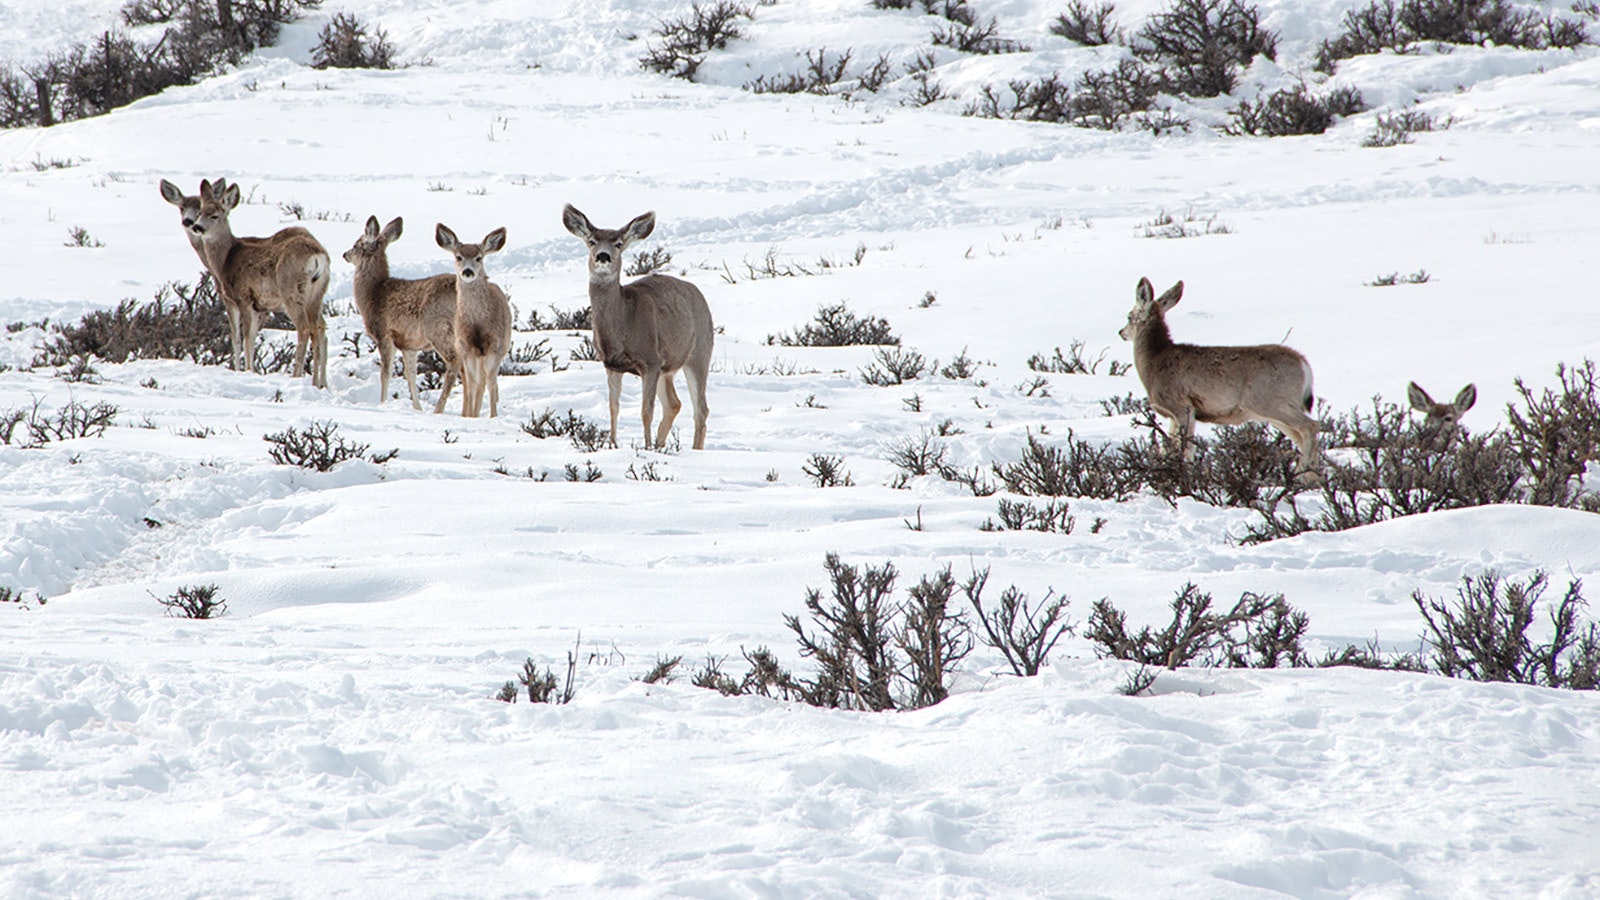 Wyoming Game and Fish Department said it's difficult deciding when, or if, to feed deer during the winter.